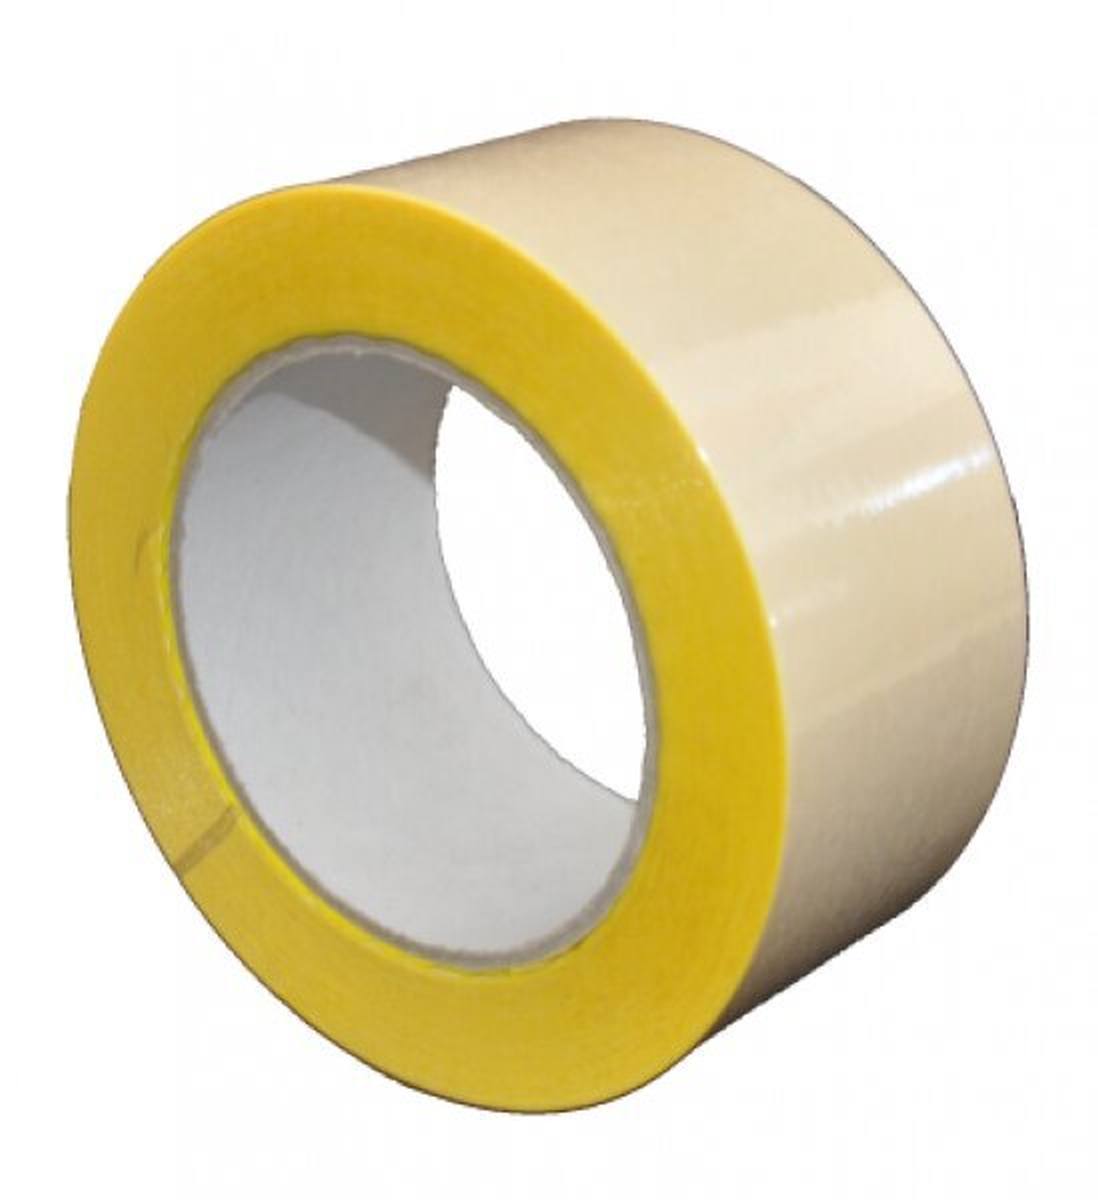 S-K-S 407 Double-sided adhesive tape with polypropylene backing, high / low tack, yellow, 25 mm x 50 m, 0.15 mm